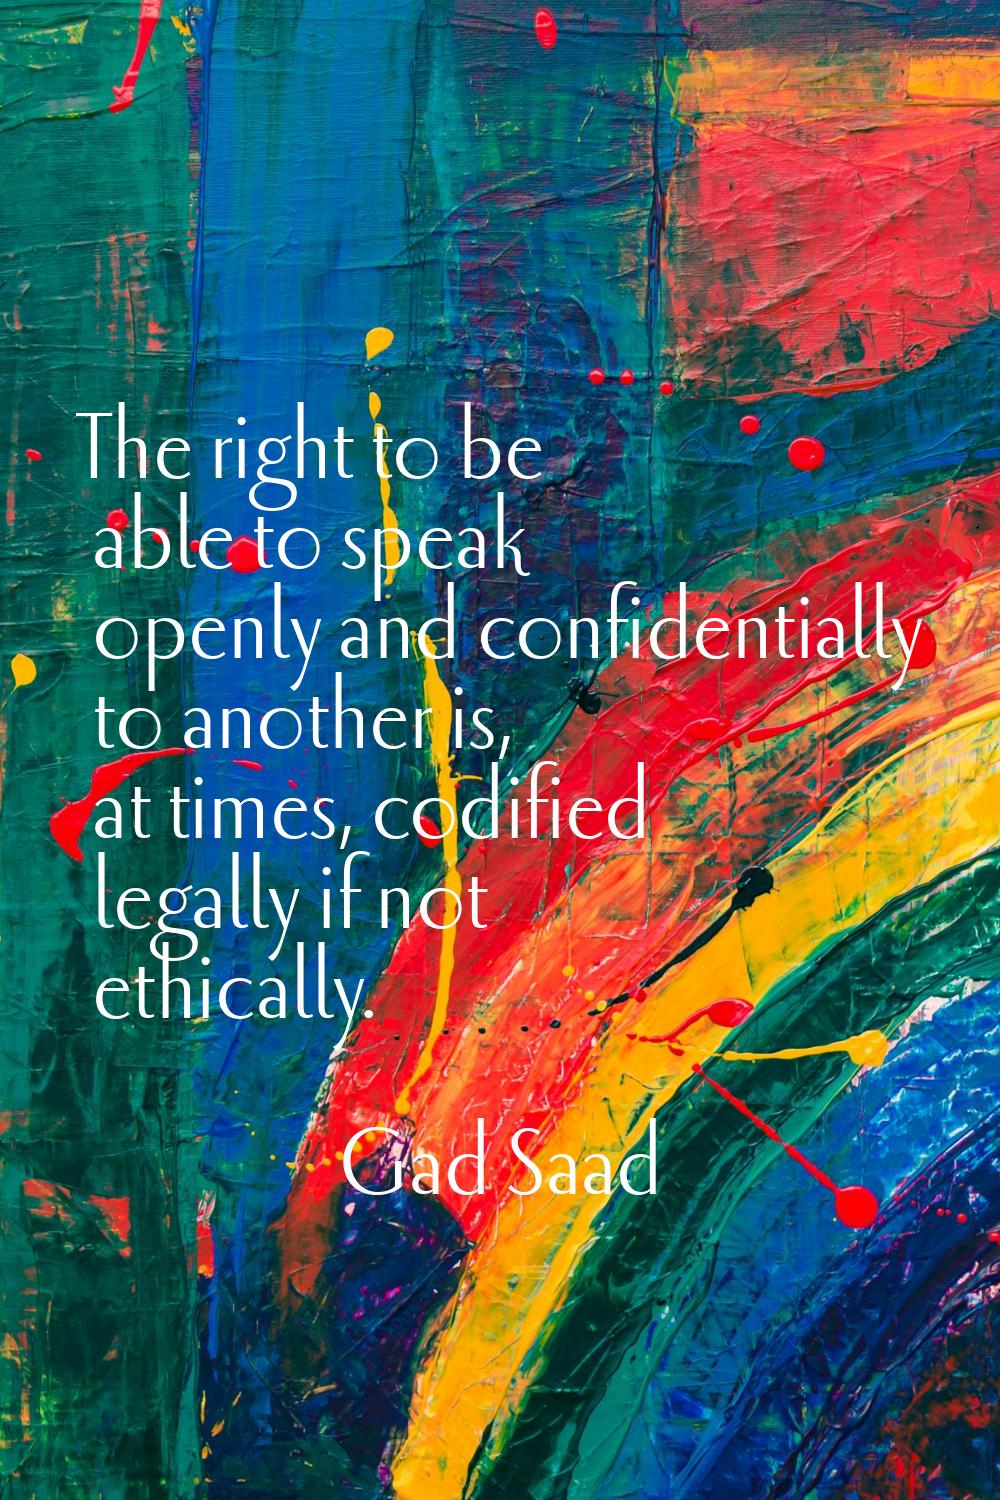 The right to be able to speak openly and confidentially to another is, at times, codified legally i